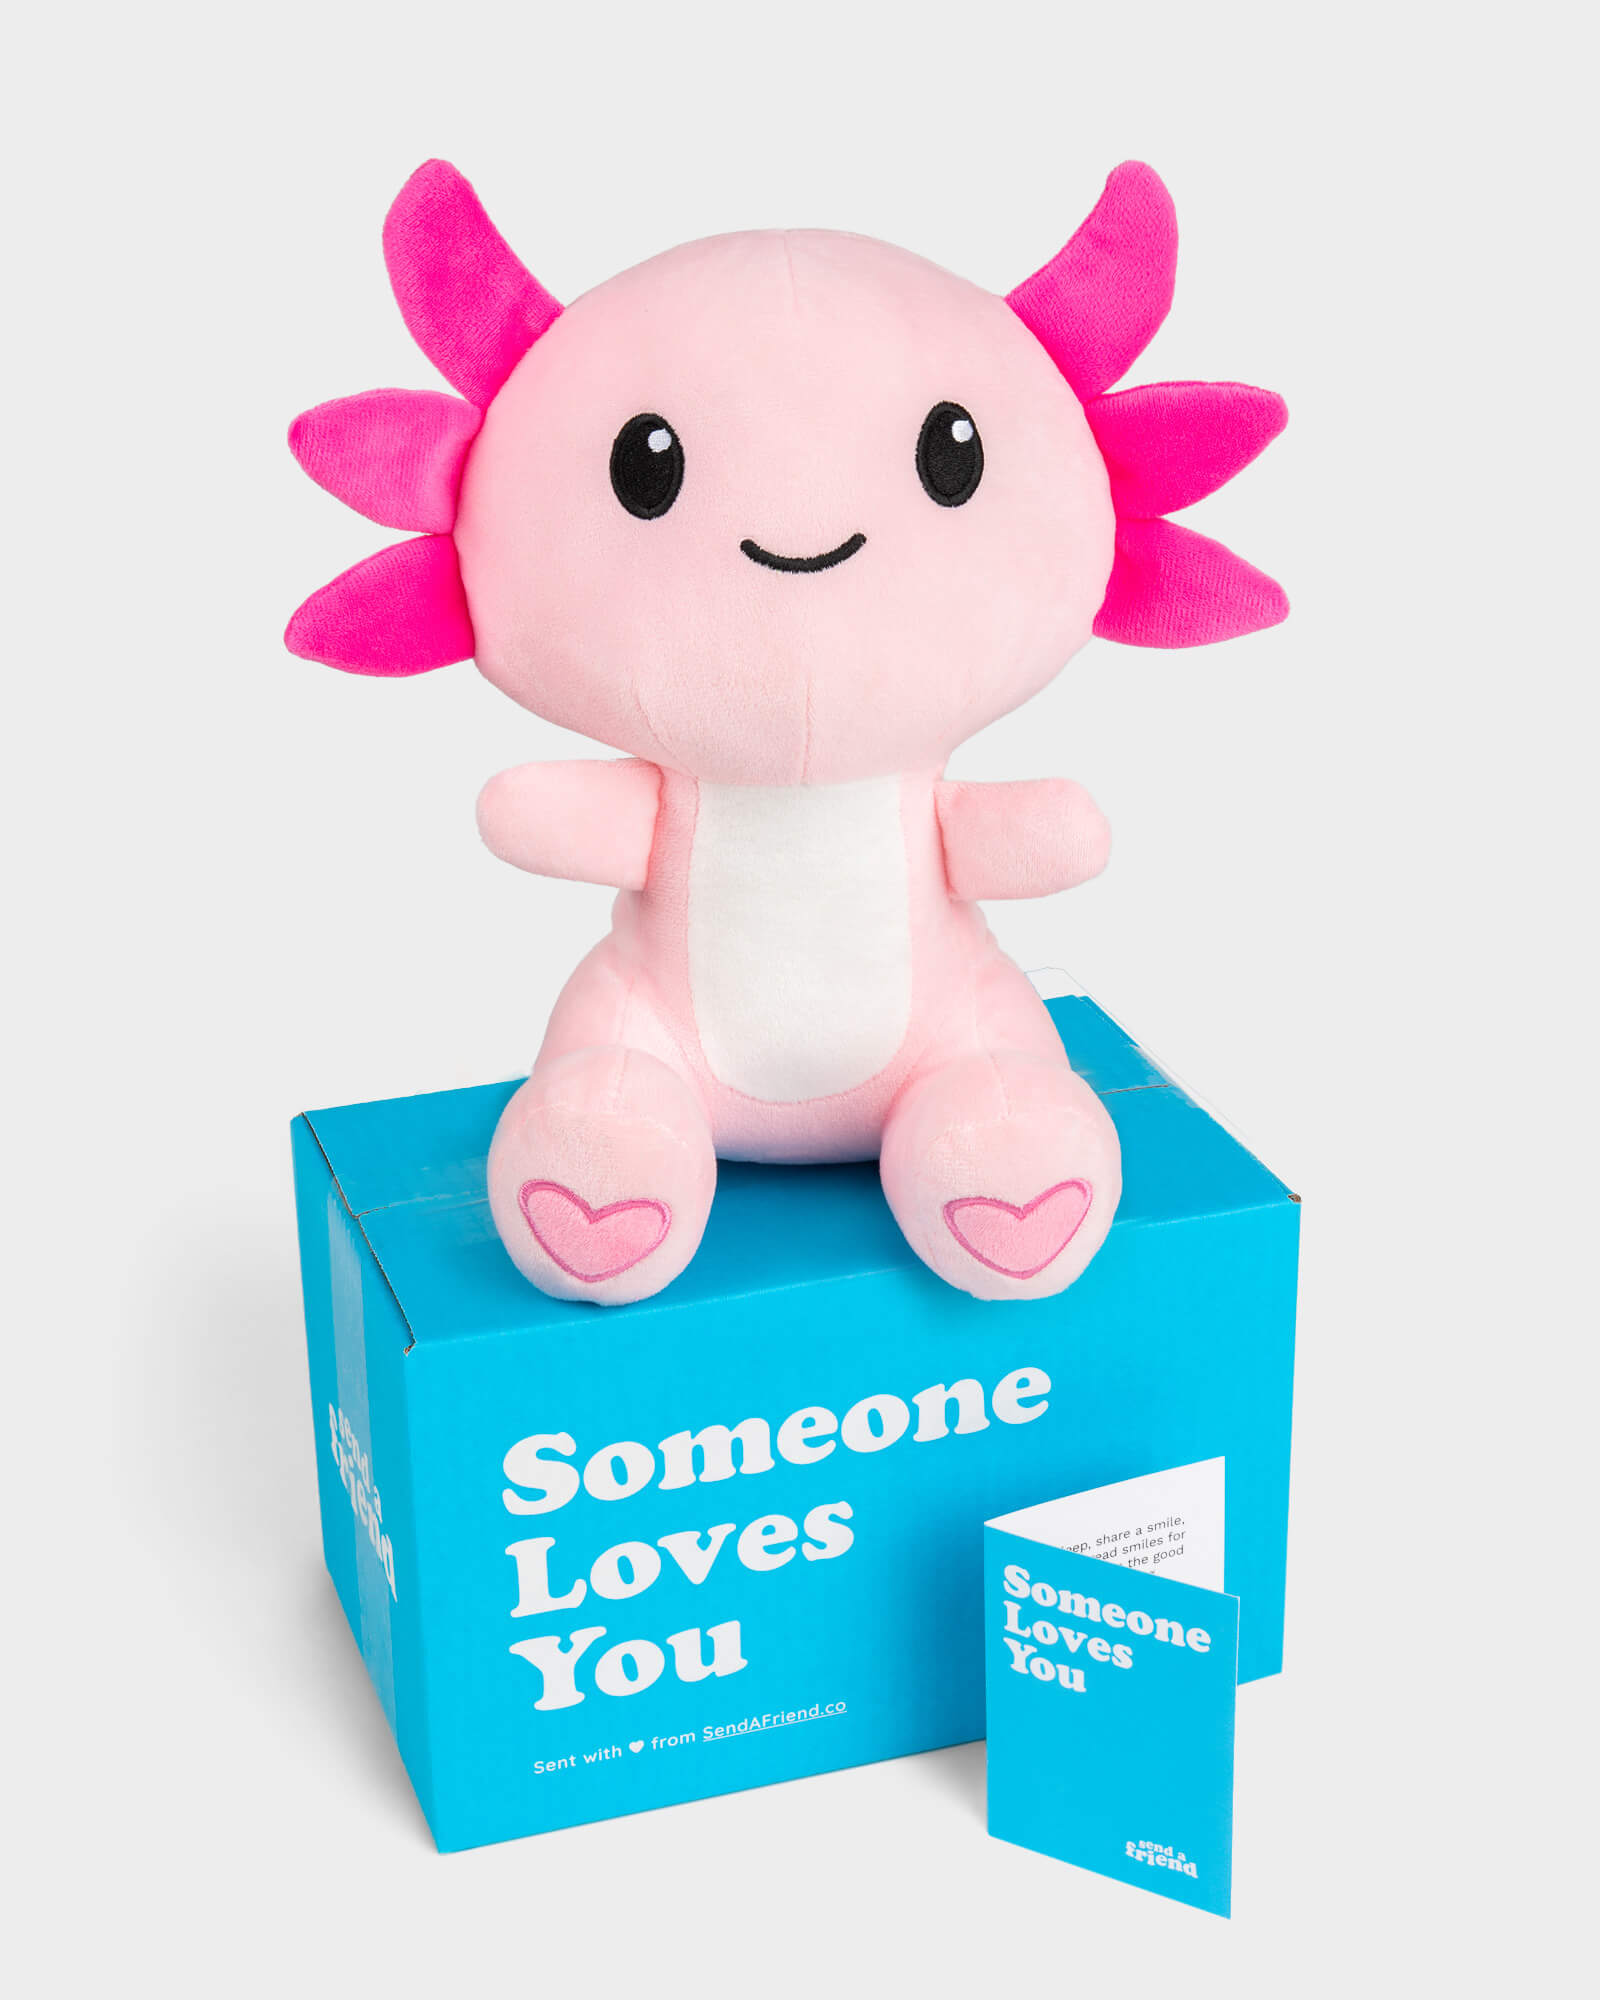 Photo of pink Alex the Axolotl plushie featuring a heart embroidered on each foot, Someone Loves You box, and notecard